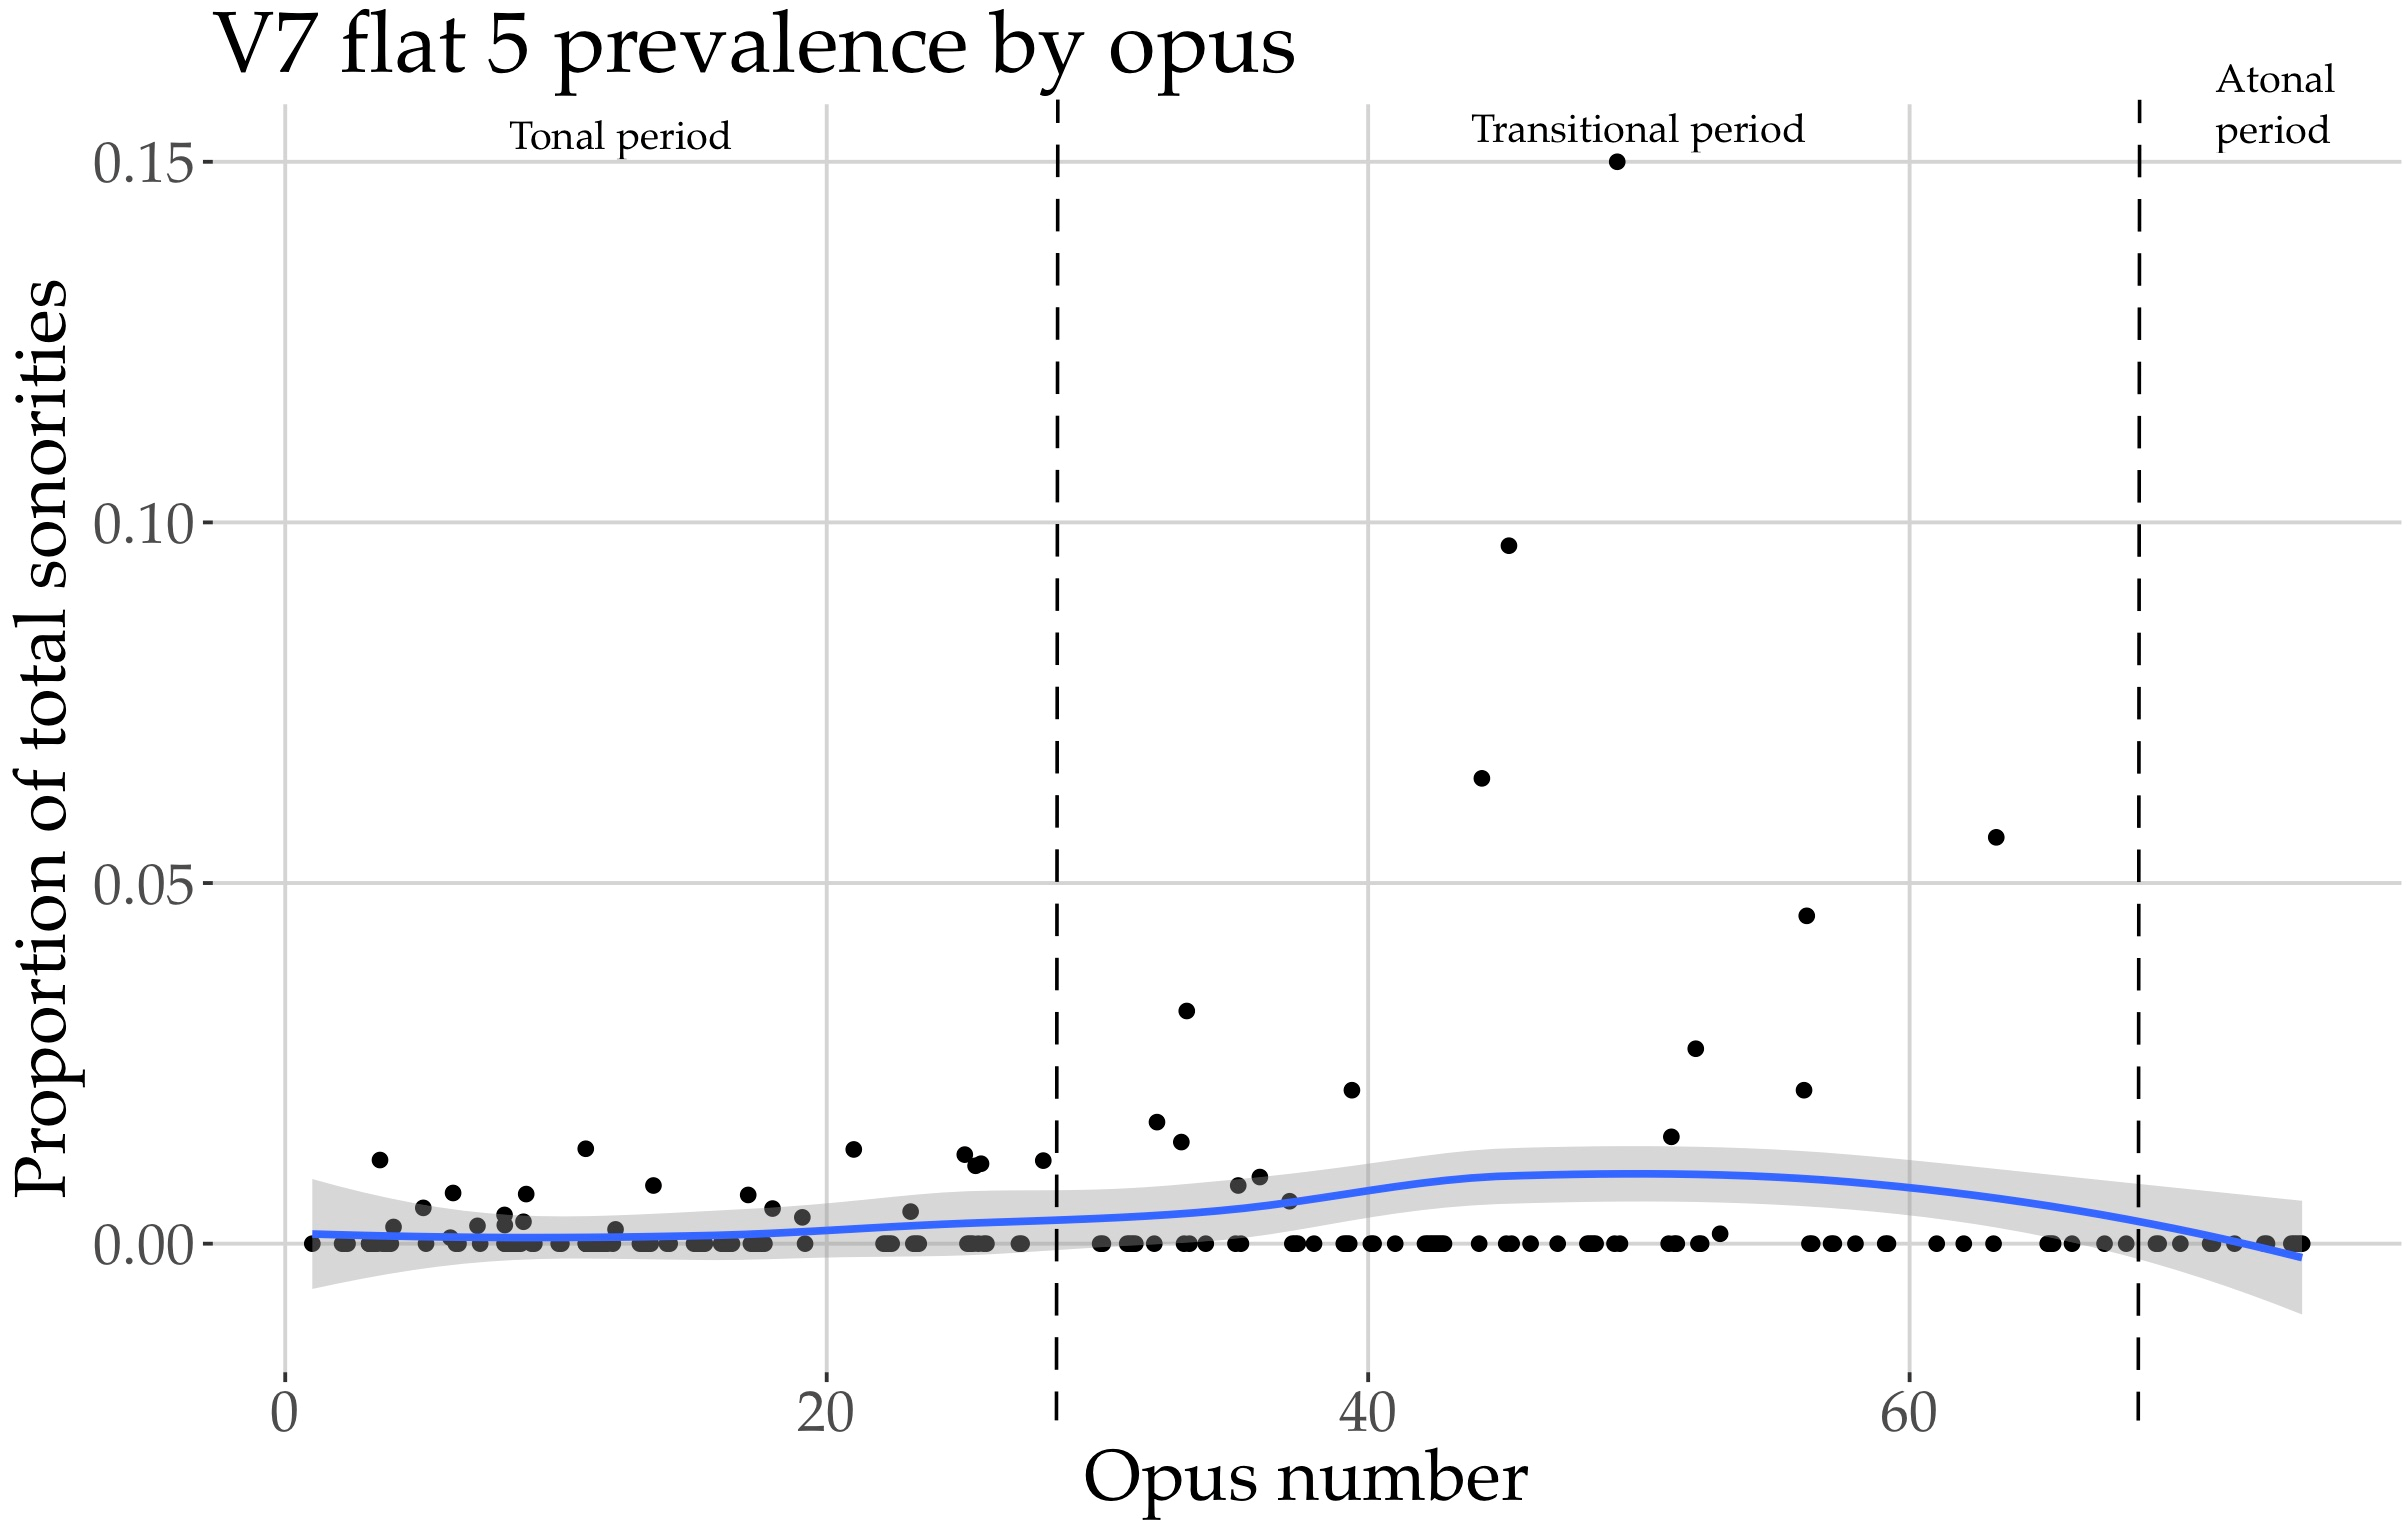 Graph showing V7 flat 5 prevalence by opus. More description below.